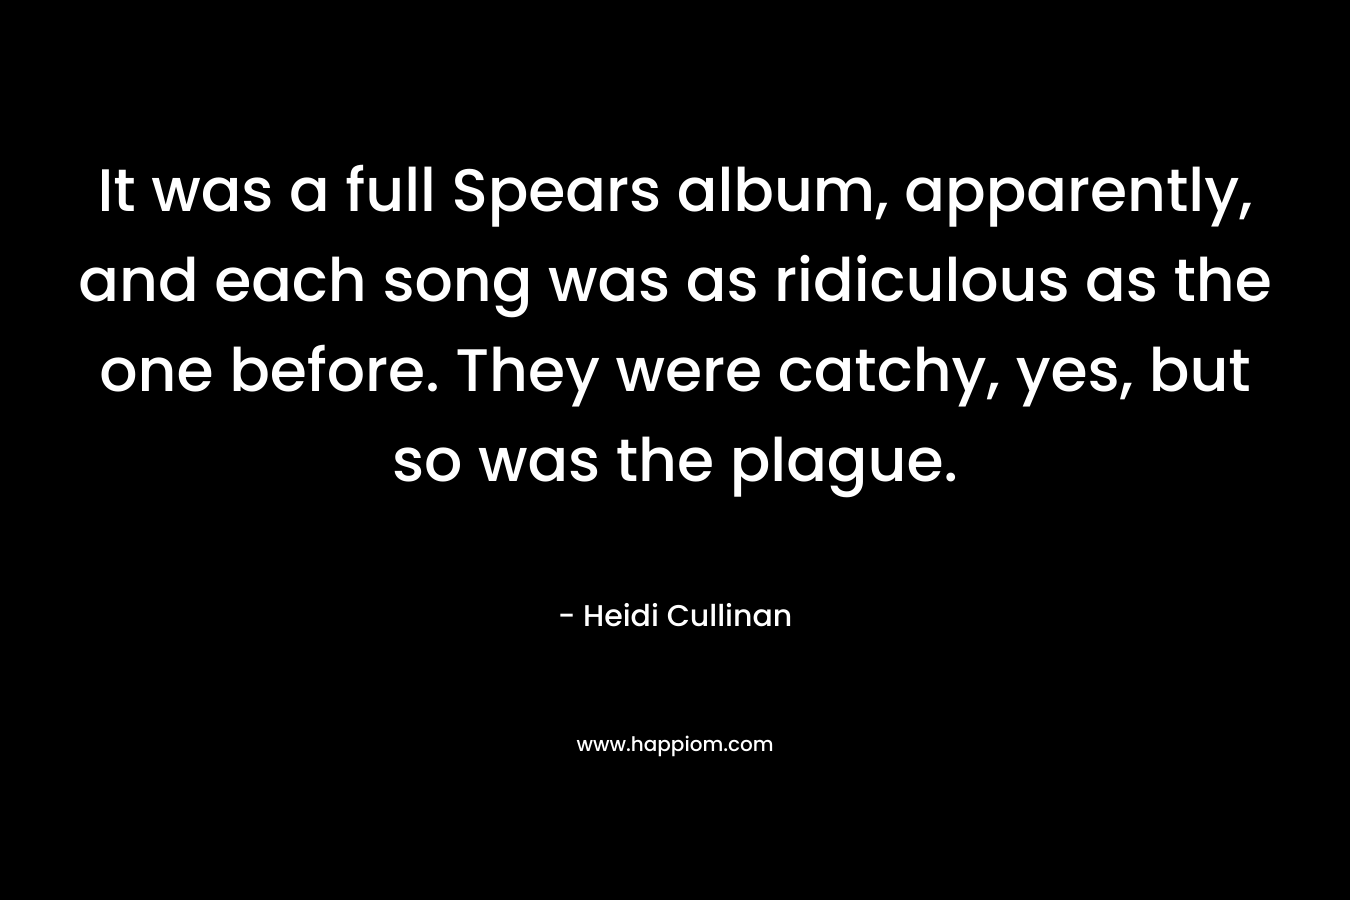 It was a full Spears album, apparently, and each song was as ridiculous as the one before. They were catchy, yes, but so was the plague.